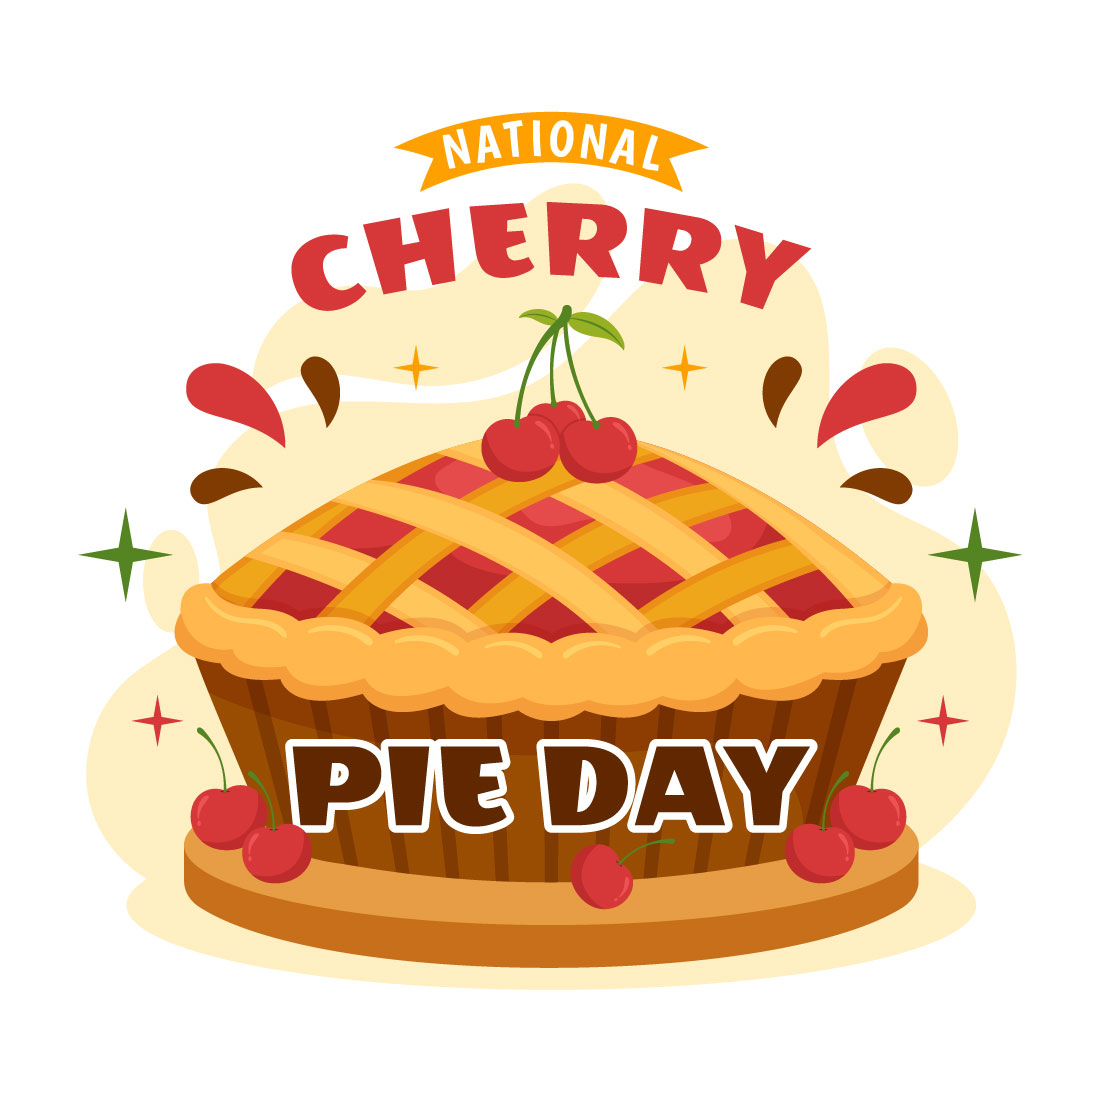 14 National Cherry Pie Day Illustration cover image.